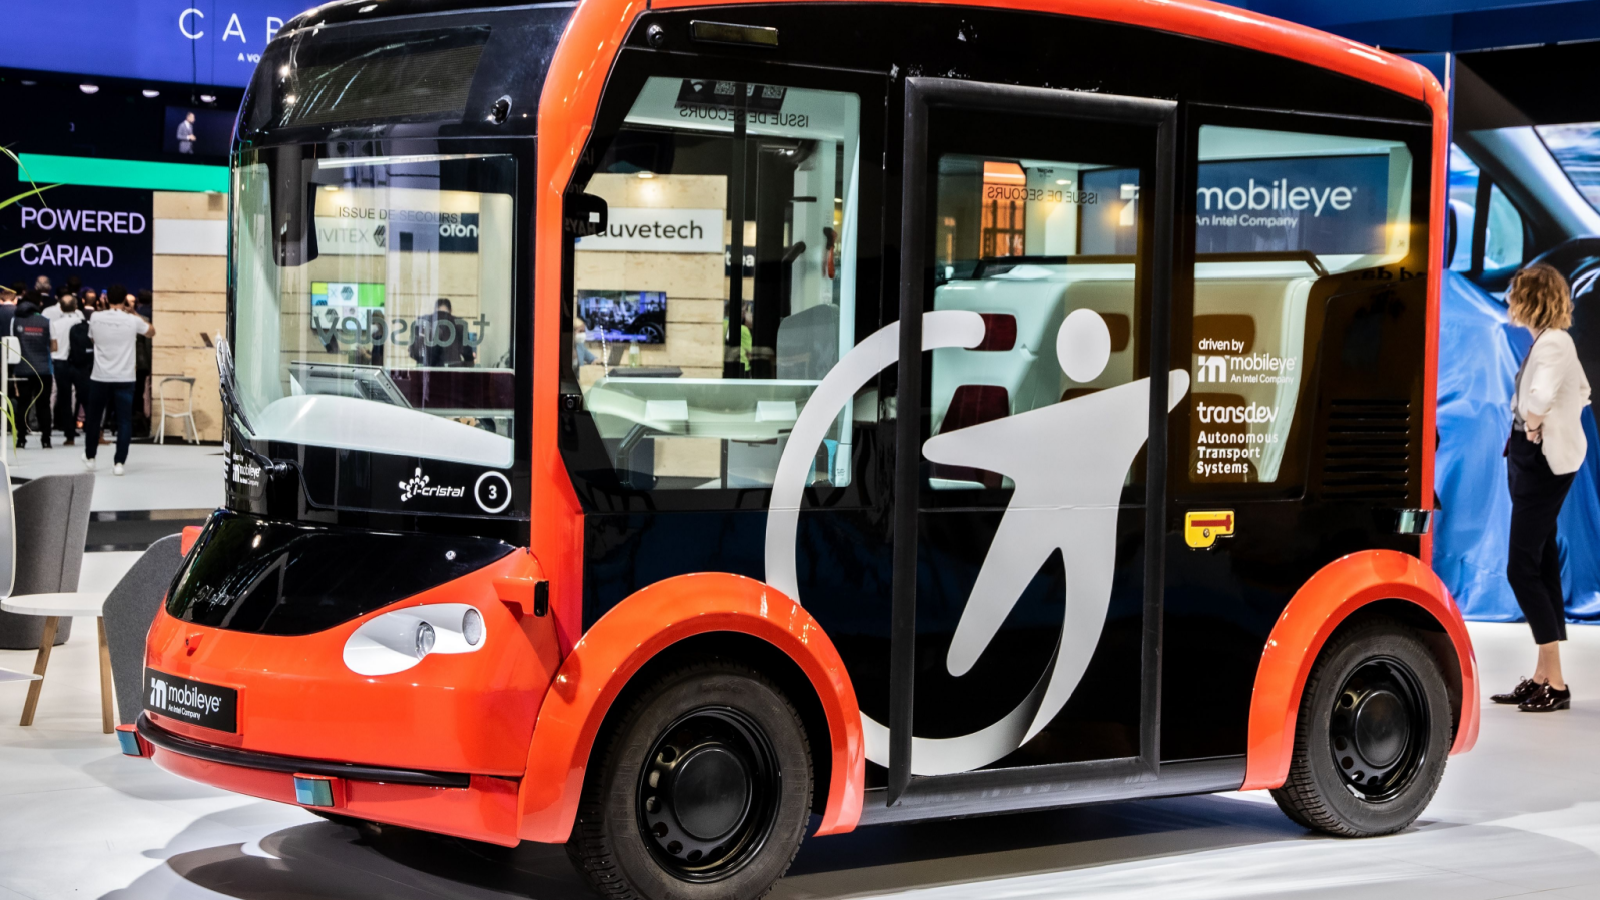 Transdev Mobileye (MBLY) autonomous driving shuttle bus showcased at the IAA Mobility 2021 motor show in Munich, Germany